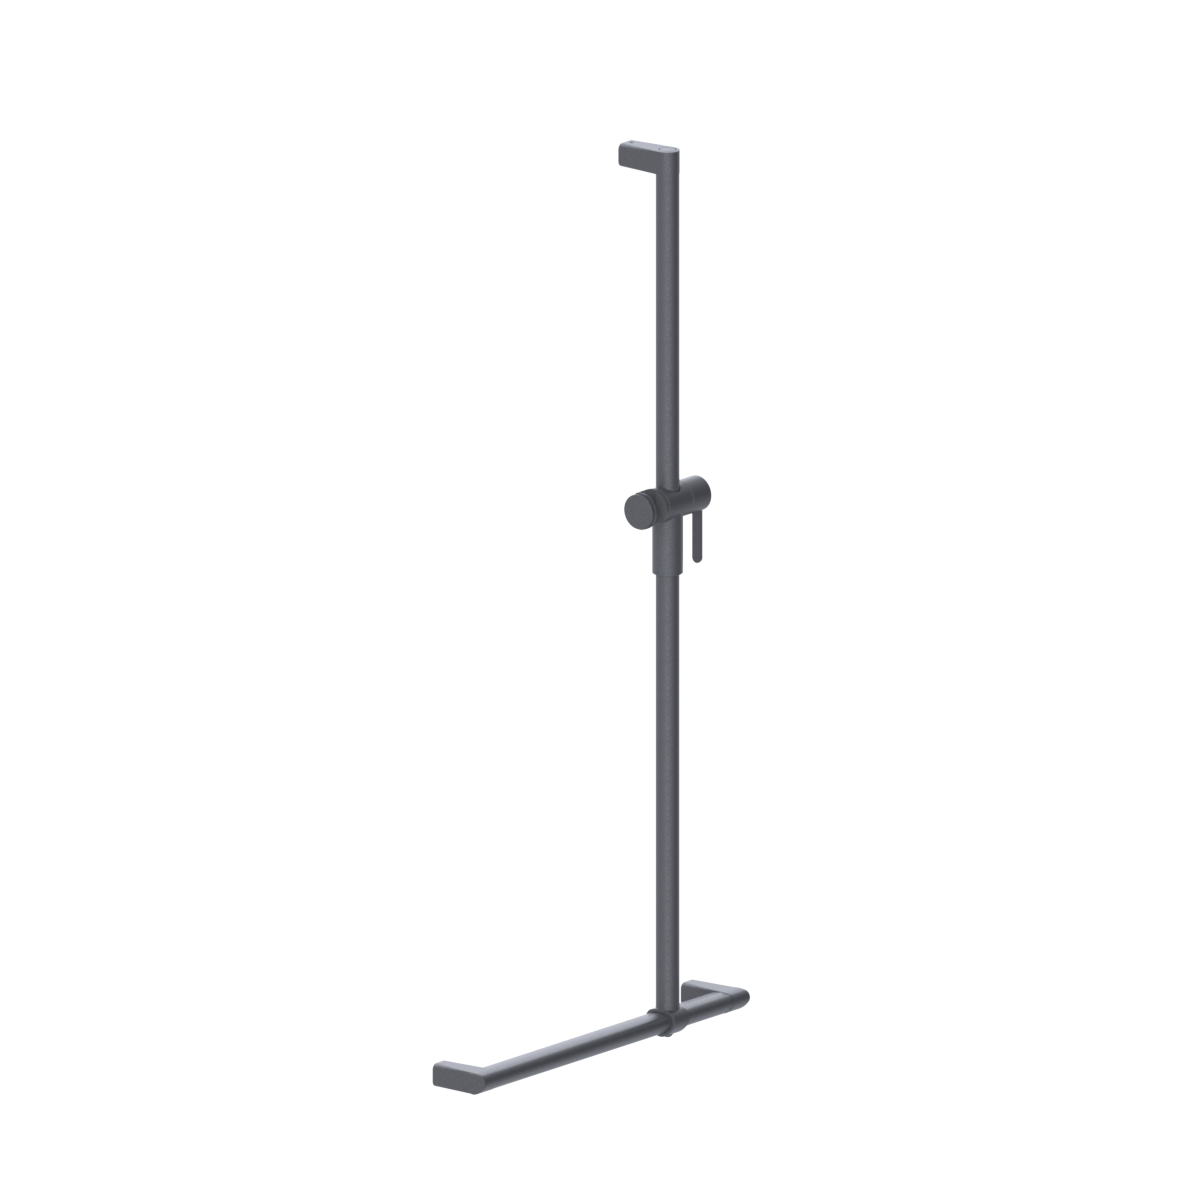 Cavere Care Shower handrail, with movable shower handrail, left and right, 500 x 1100 mm, single-point mounting, Cavere Metallic anthracite